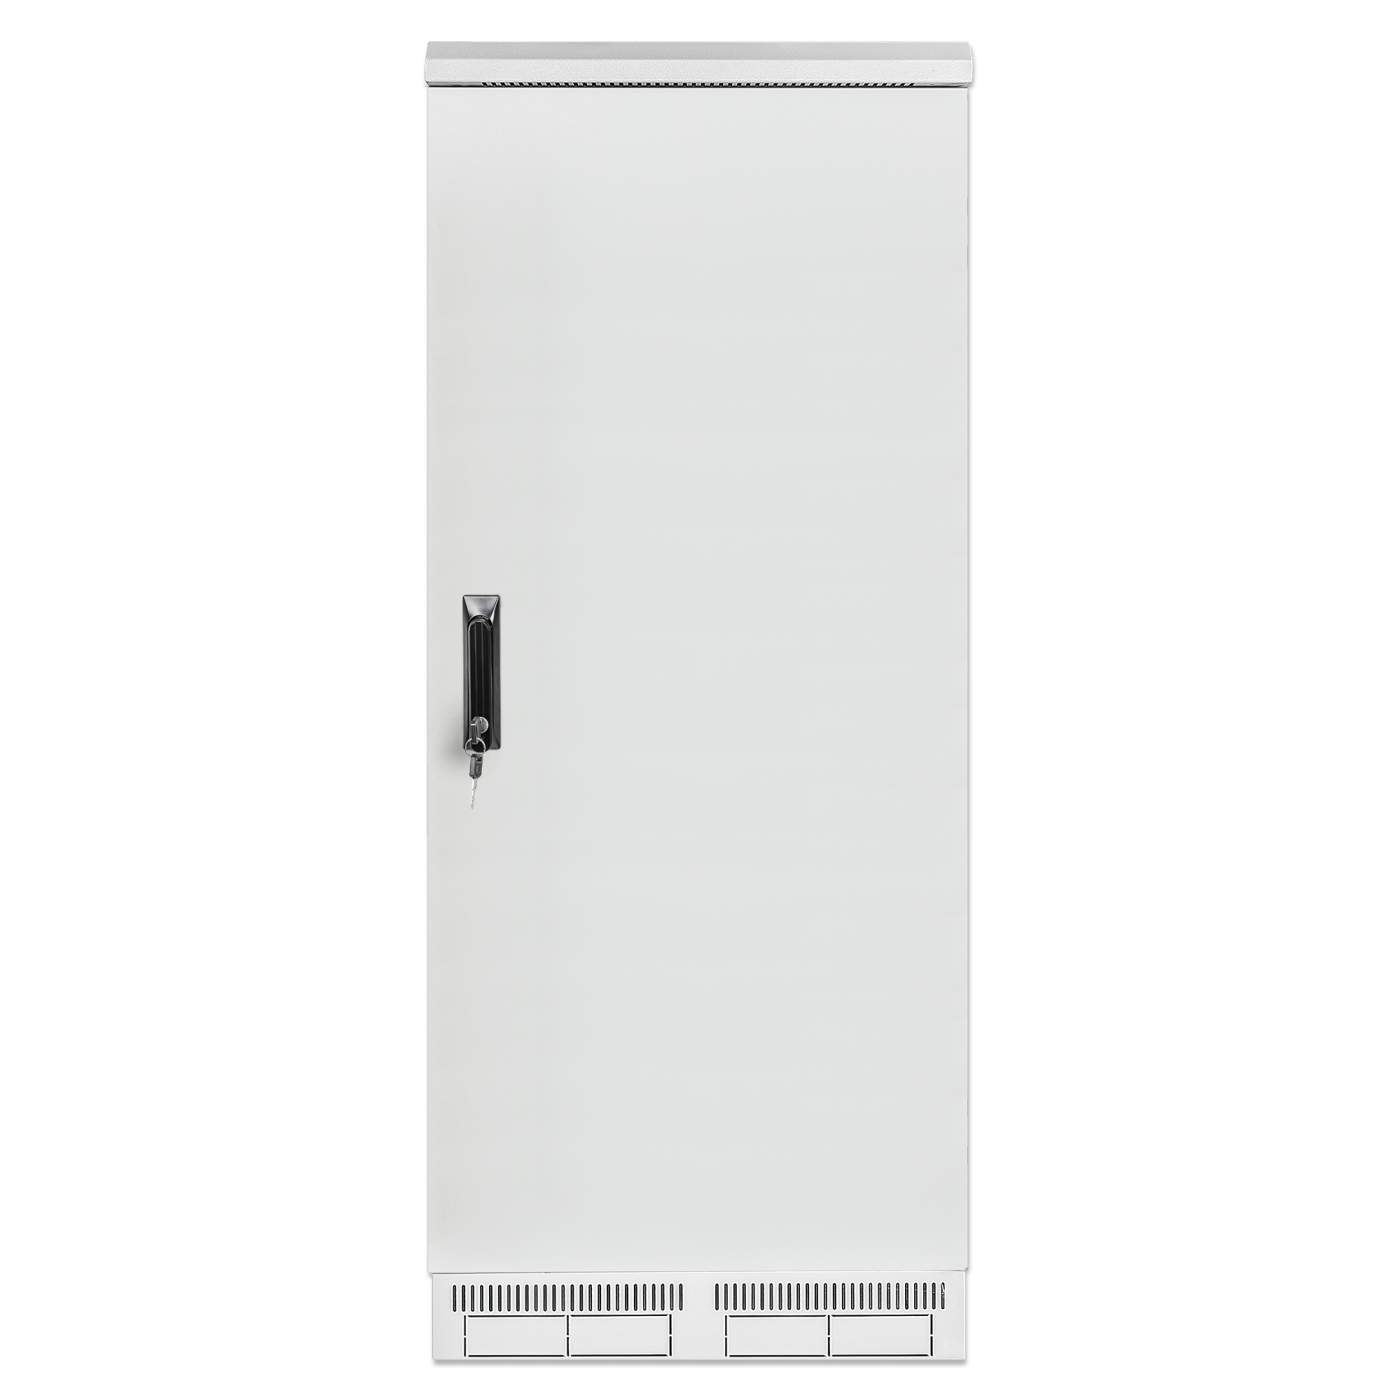 Industrial IP55 19" Network Cabinet with Integrated Fans, 27U Image 3